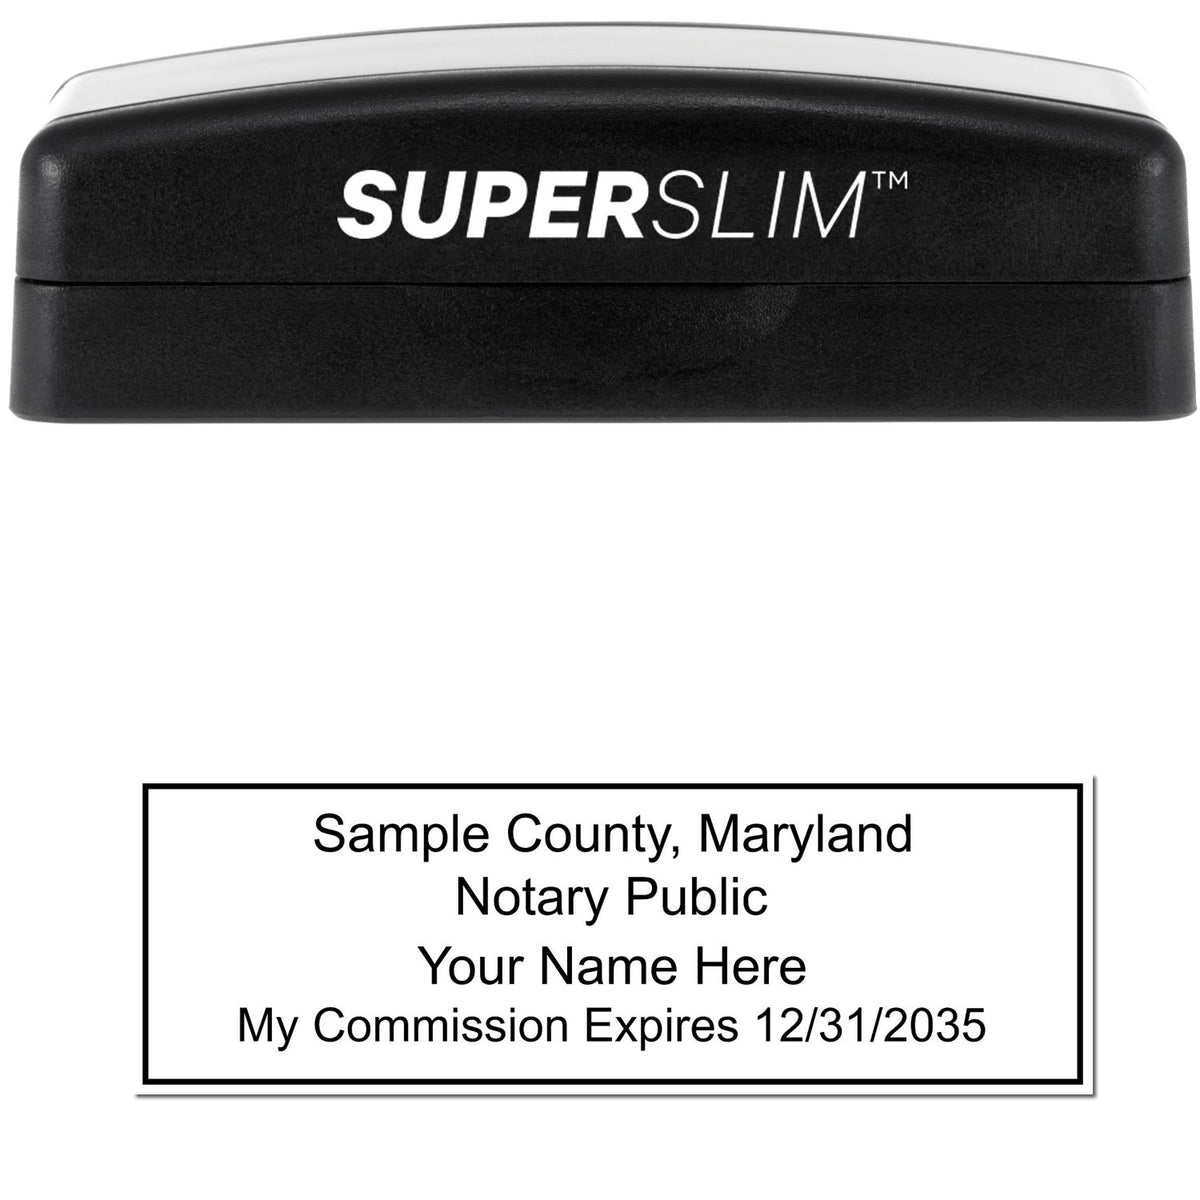 The main image for the Super Slim Maryland Notary Public Stamp depicting a sample of the imprint and electronic files